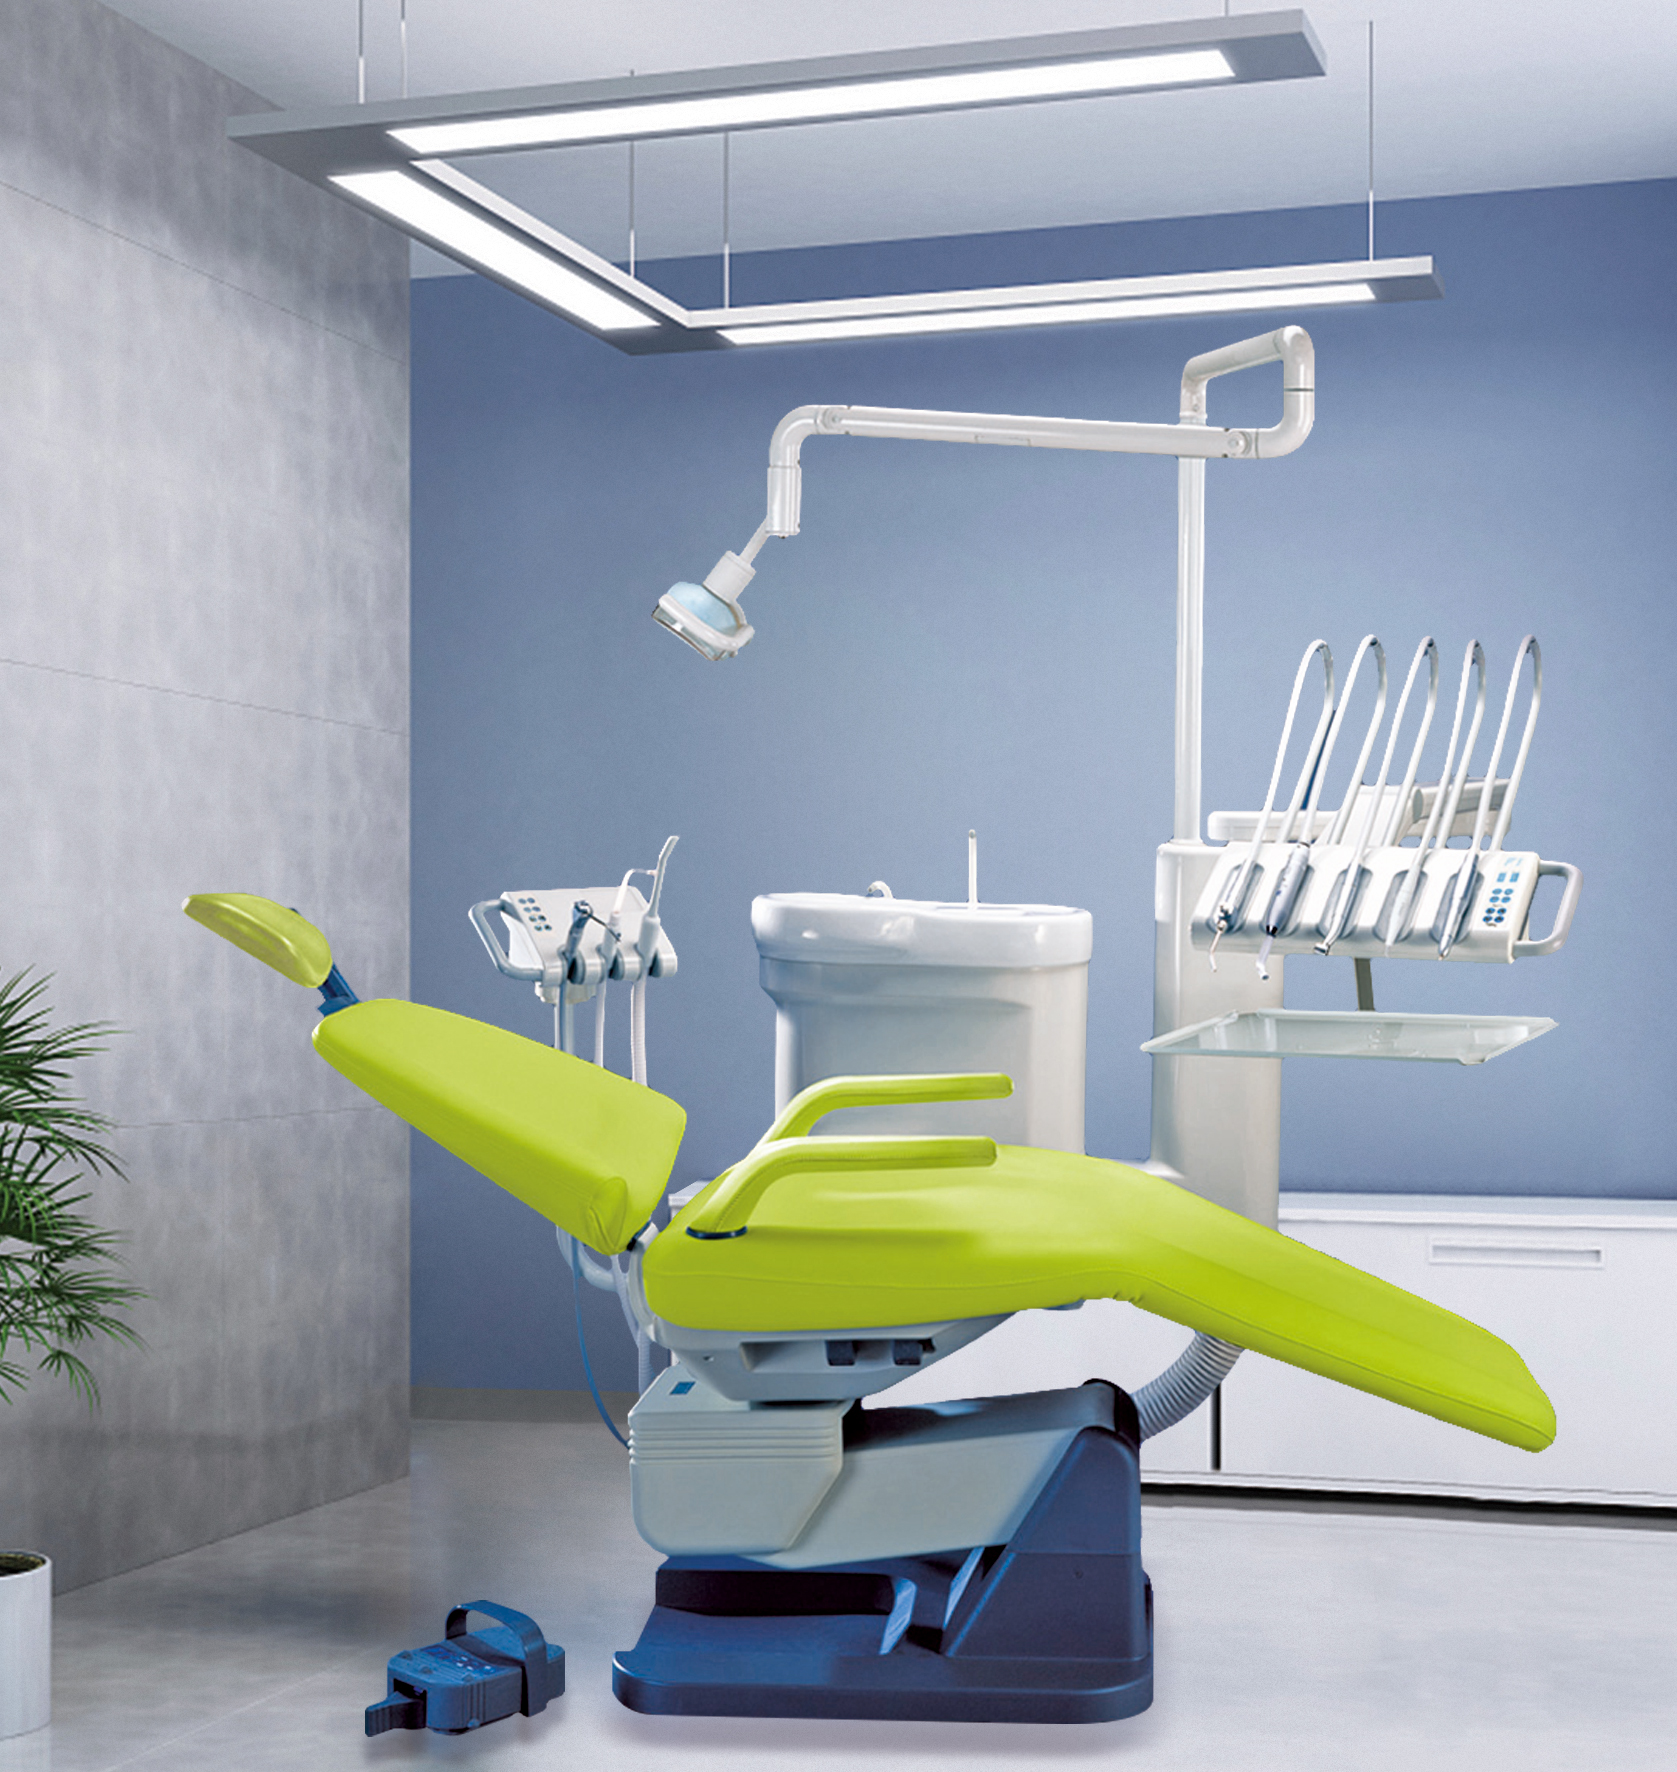 Chair-mounted dental unit